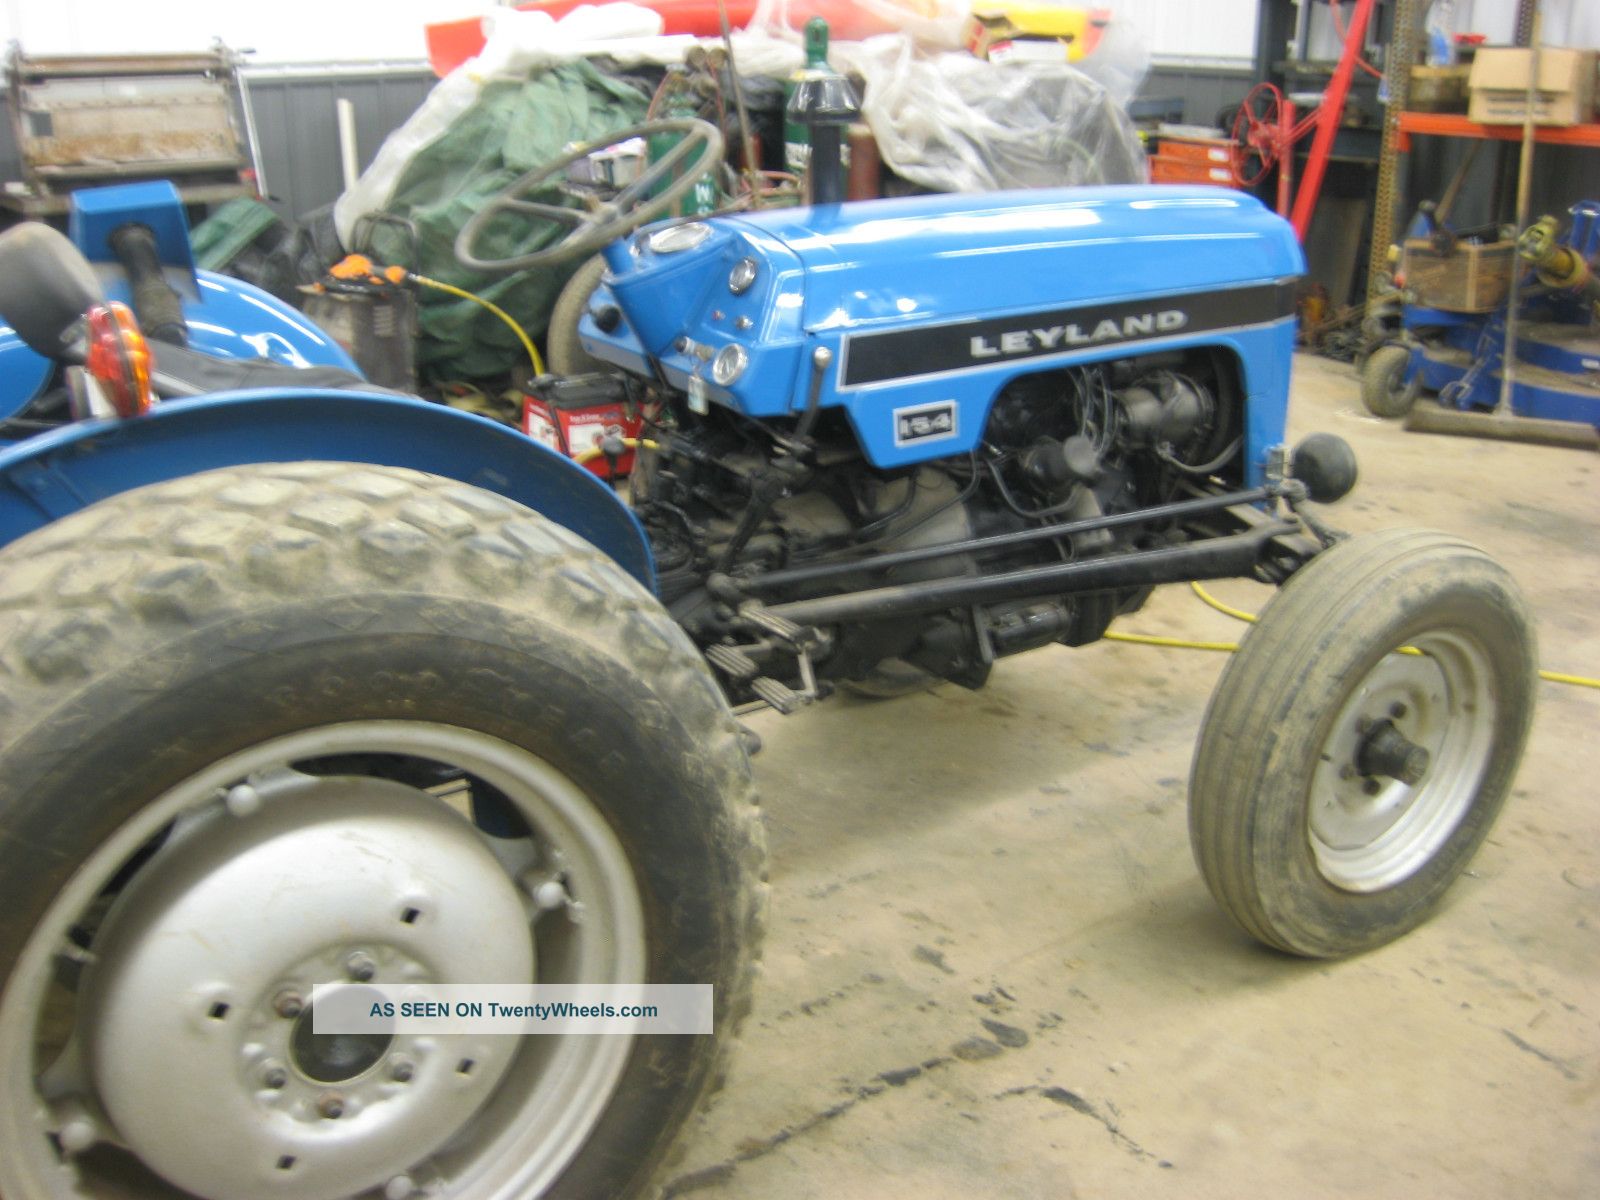 Leyland 154 Farm Tractor In Excellant Condition With Loader And Parts Tractor. Tractors photo